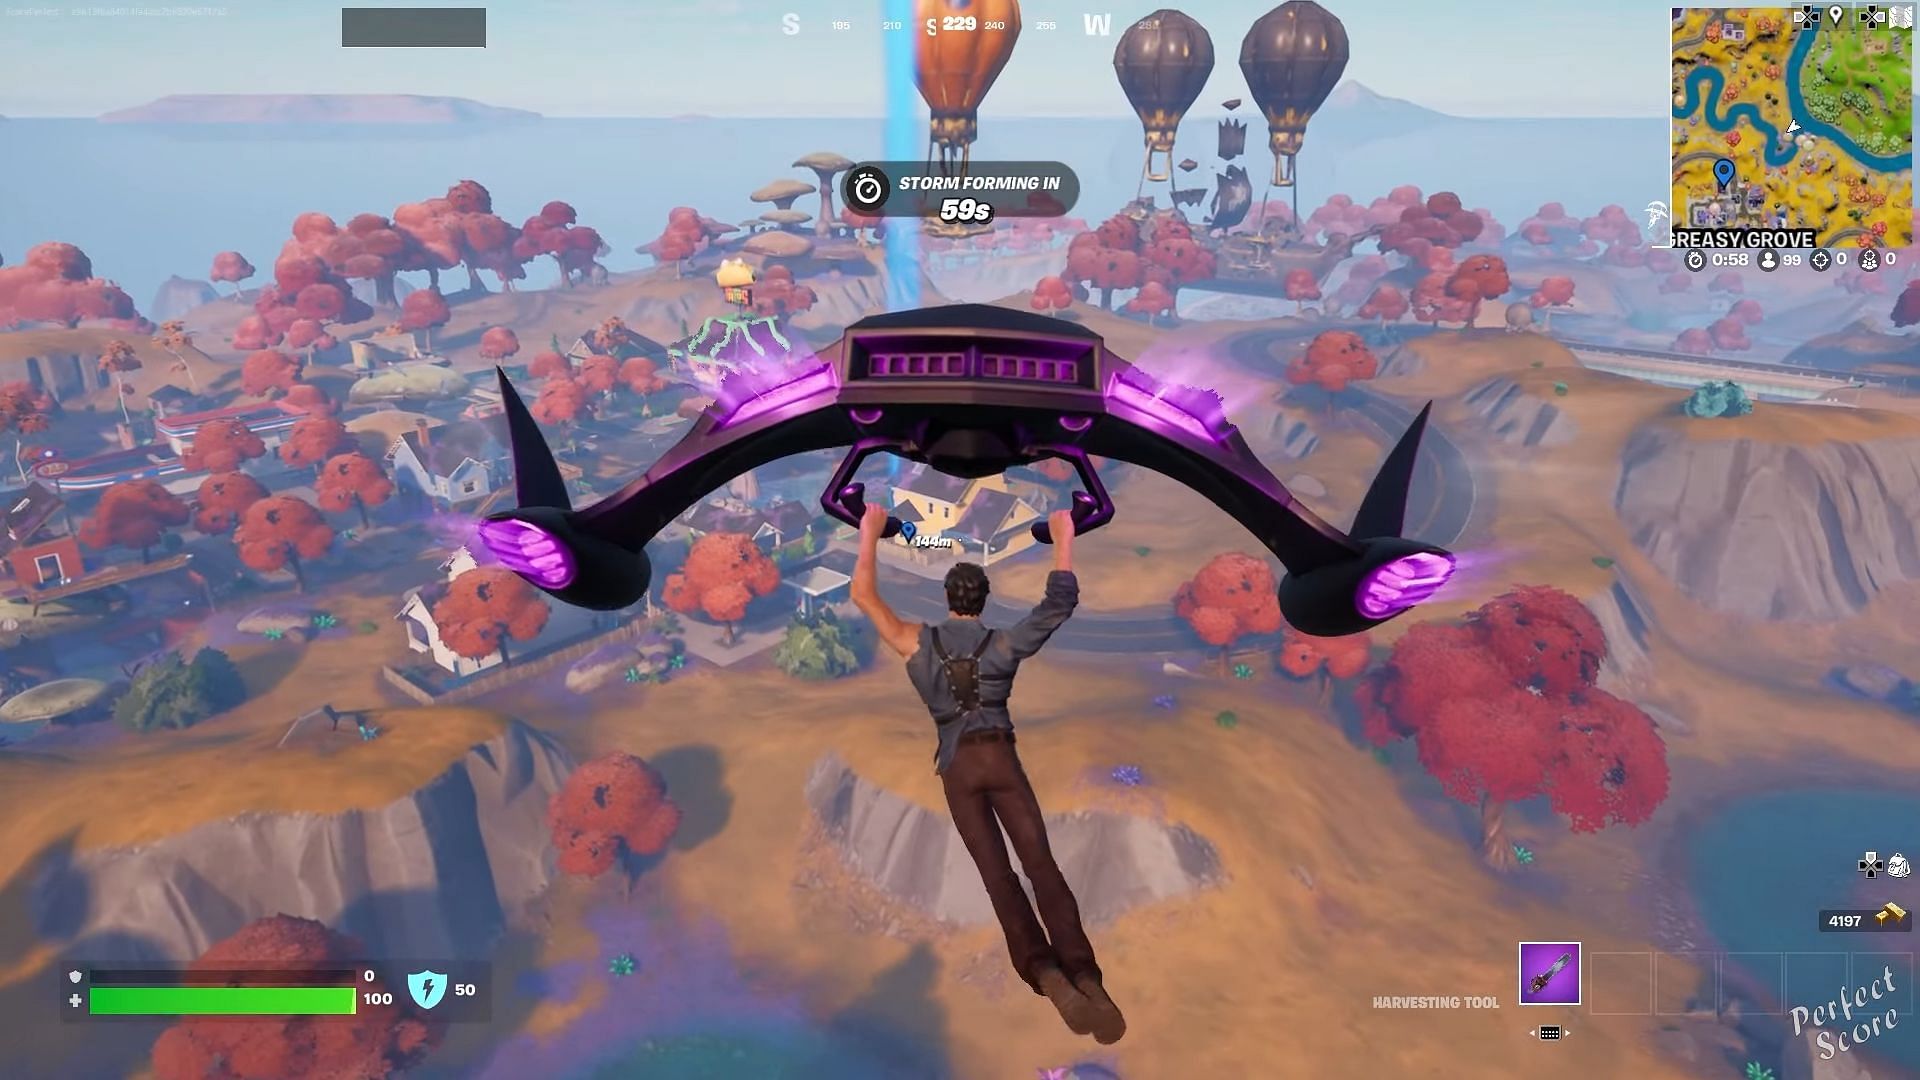 Greasy Grove is a great place to complete the latest Halloween challenge (Image via Epic Games)